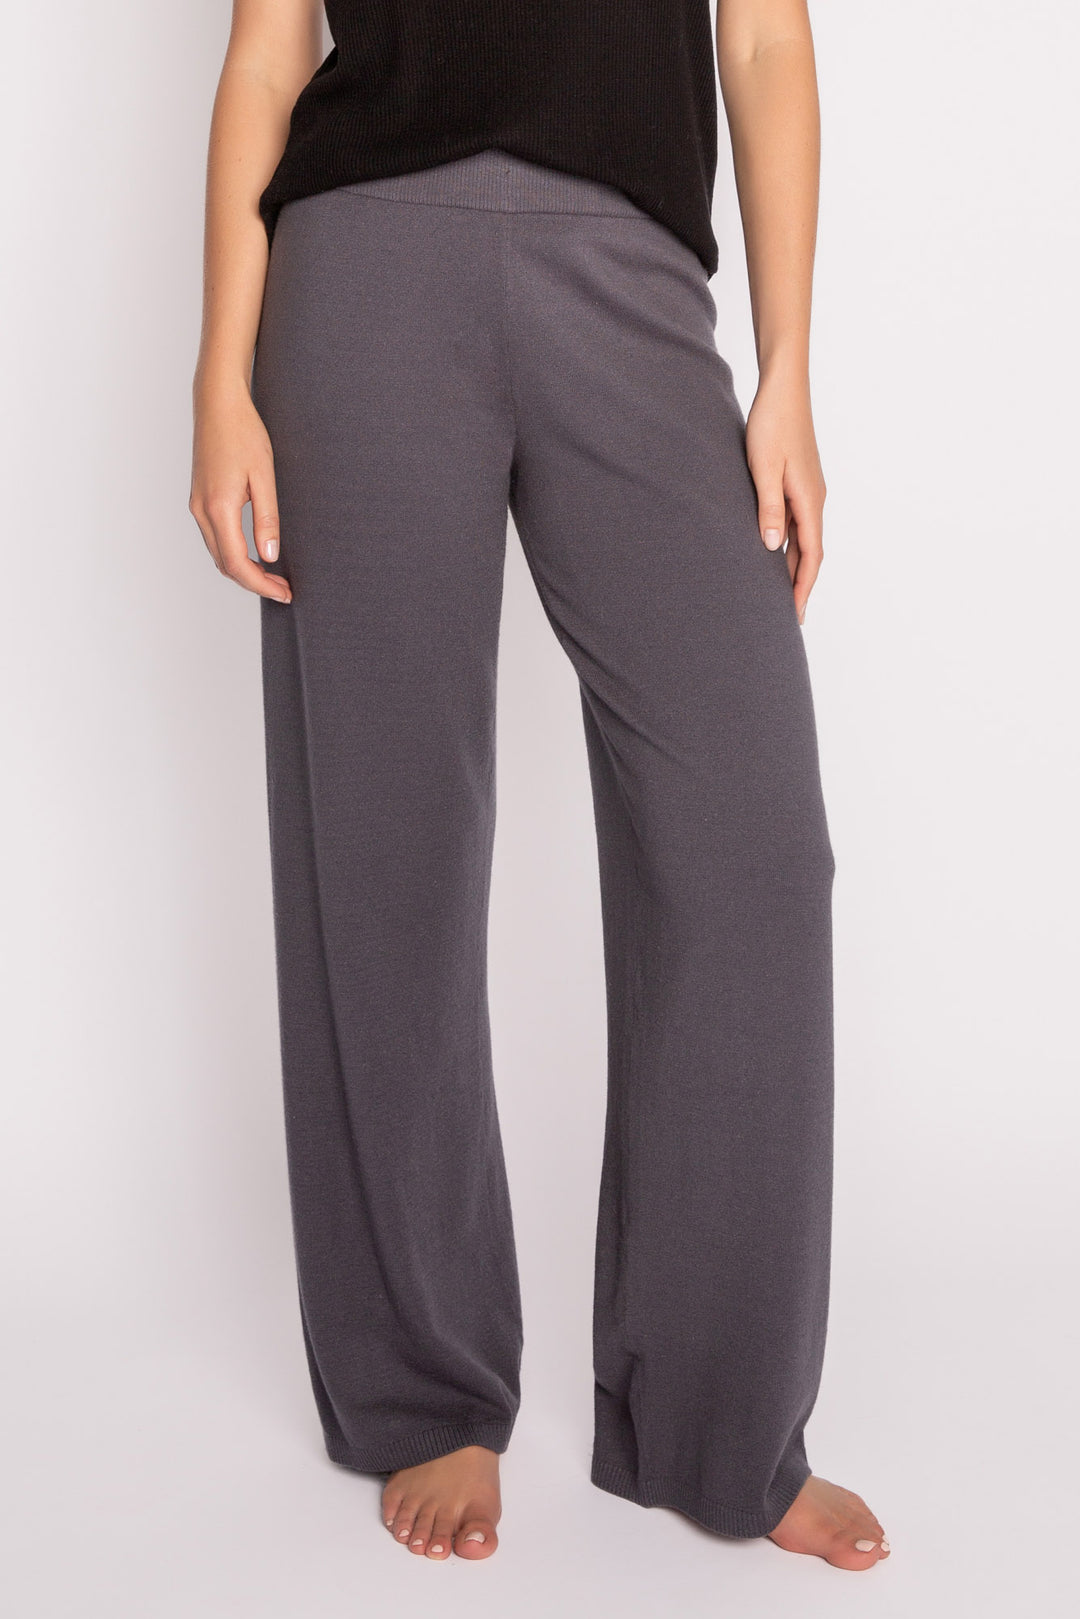 Sweater-knit lounge pant in charcoal with rib knit waistband (7231886000228)